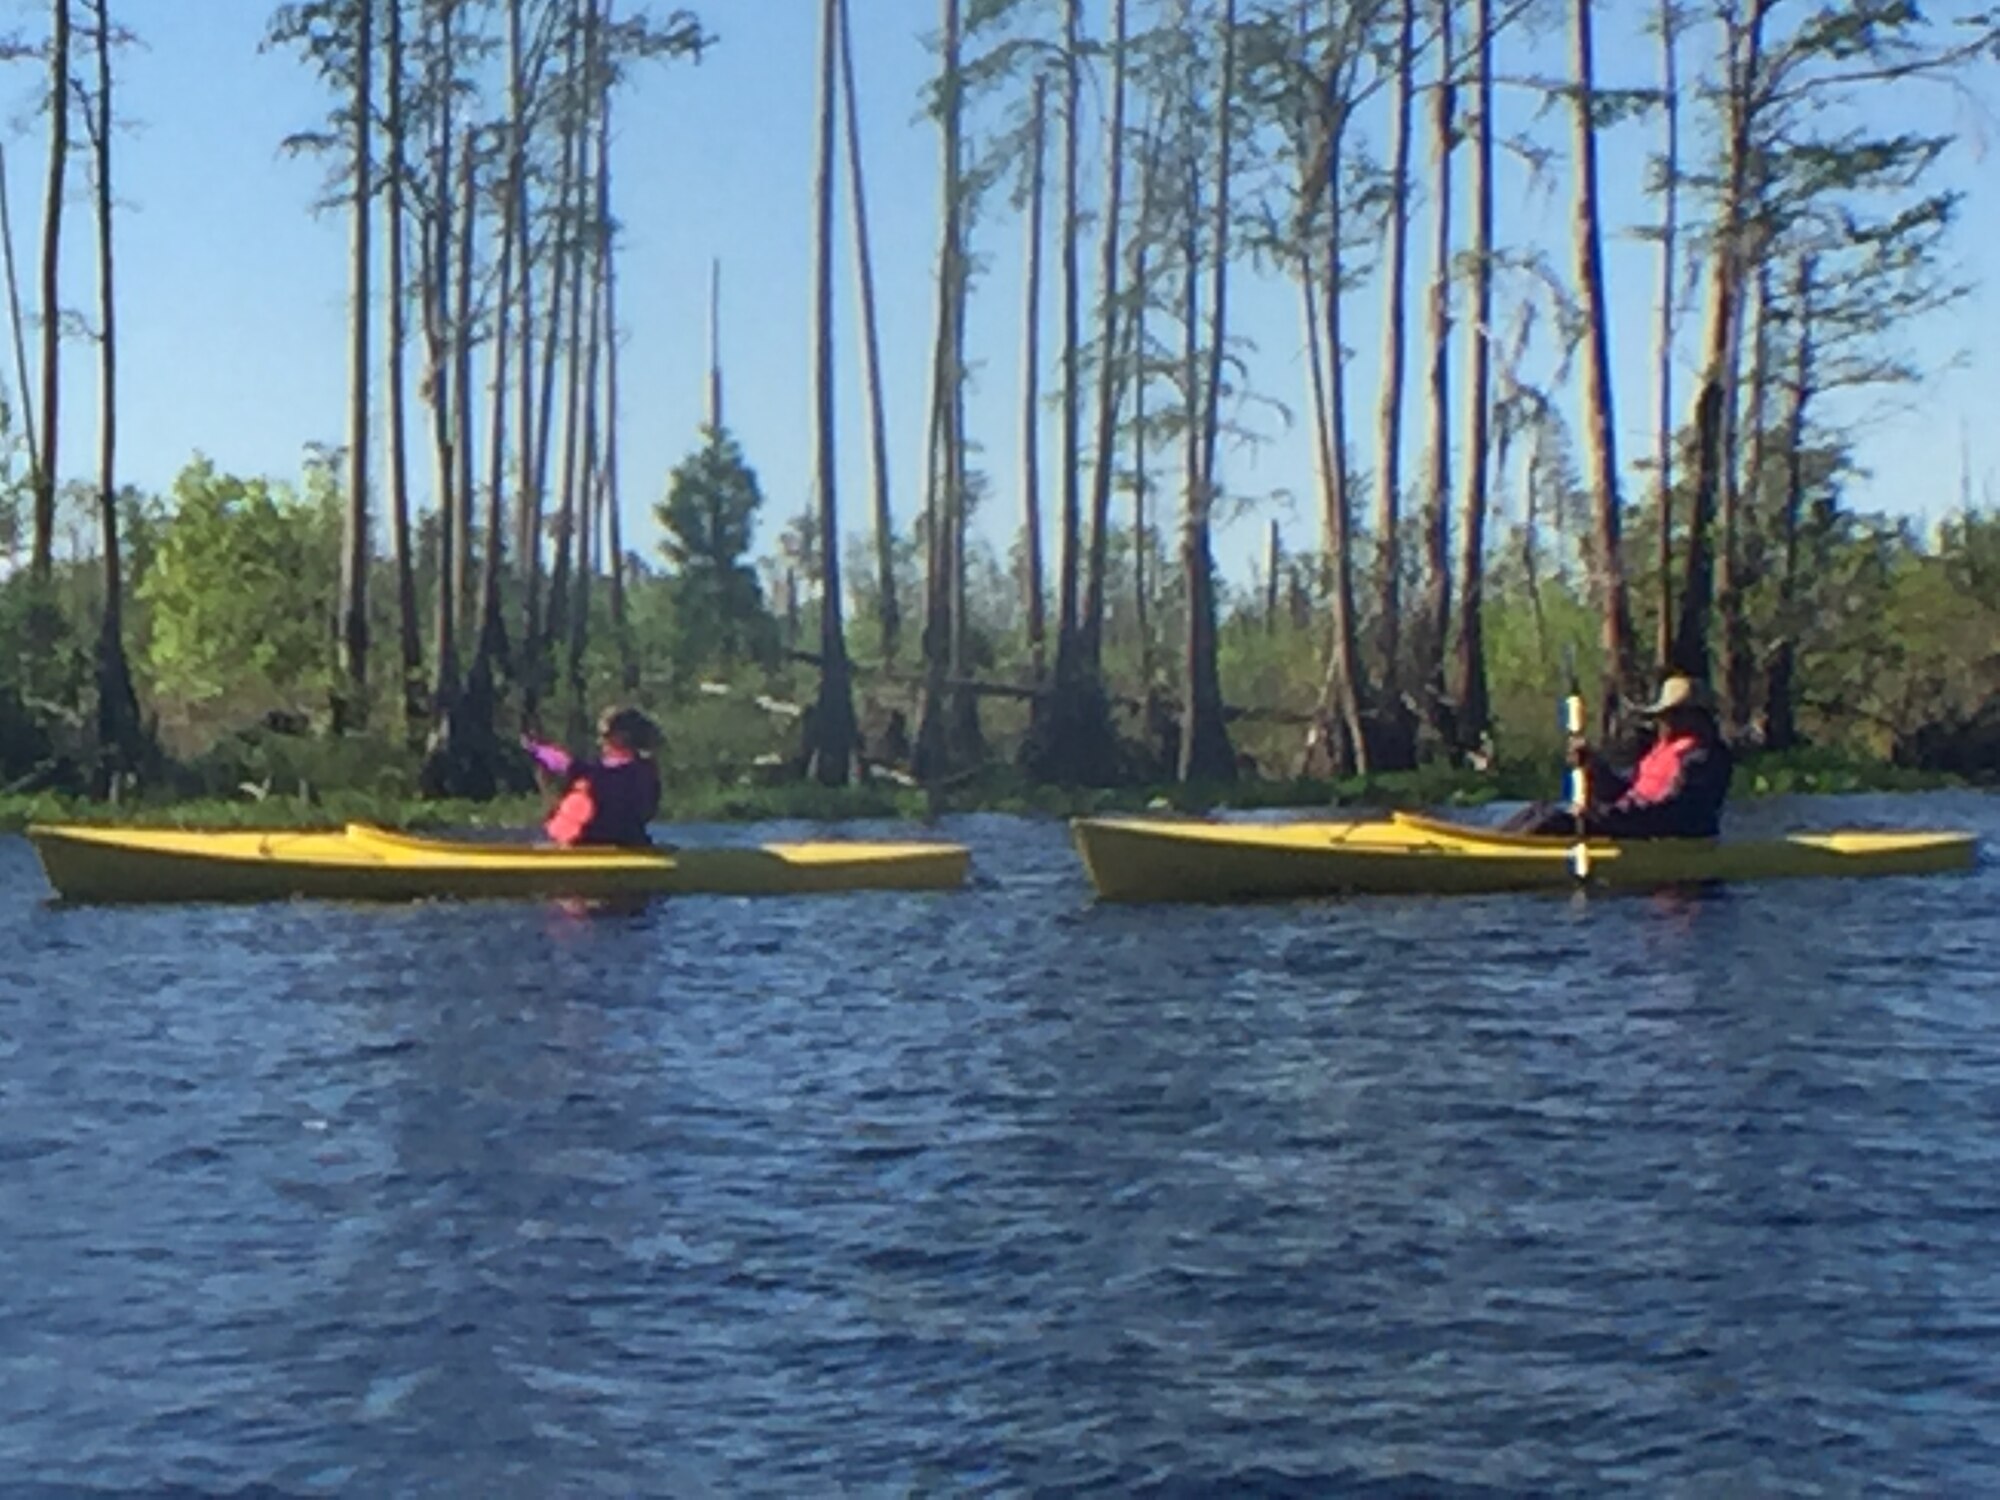 The 125th Fighter Wing Chaplain Corp kayaked the Okefenokee Swamp in Georgia as part of a leadership and team building exercise. 